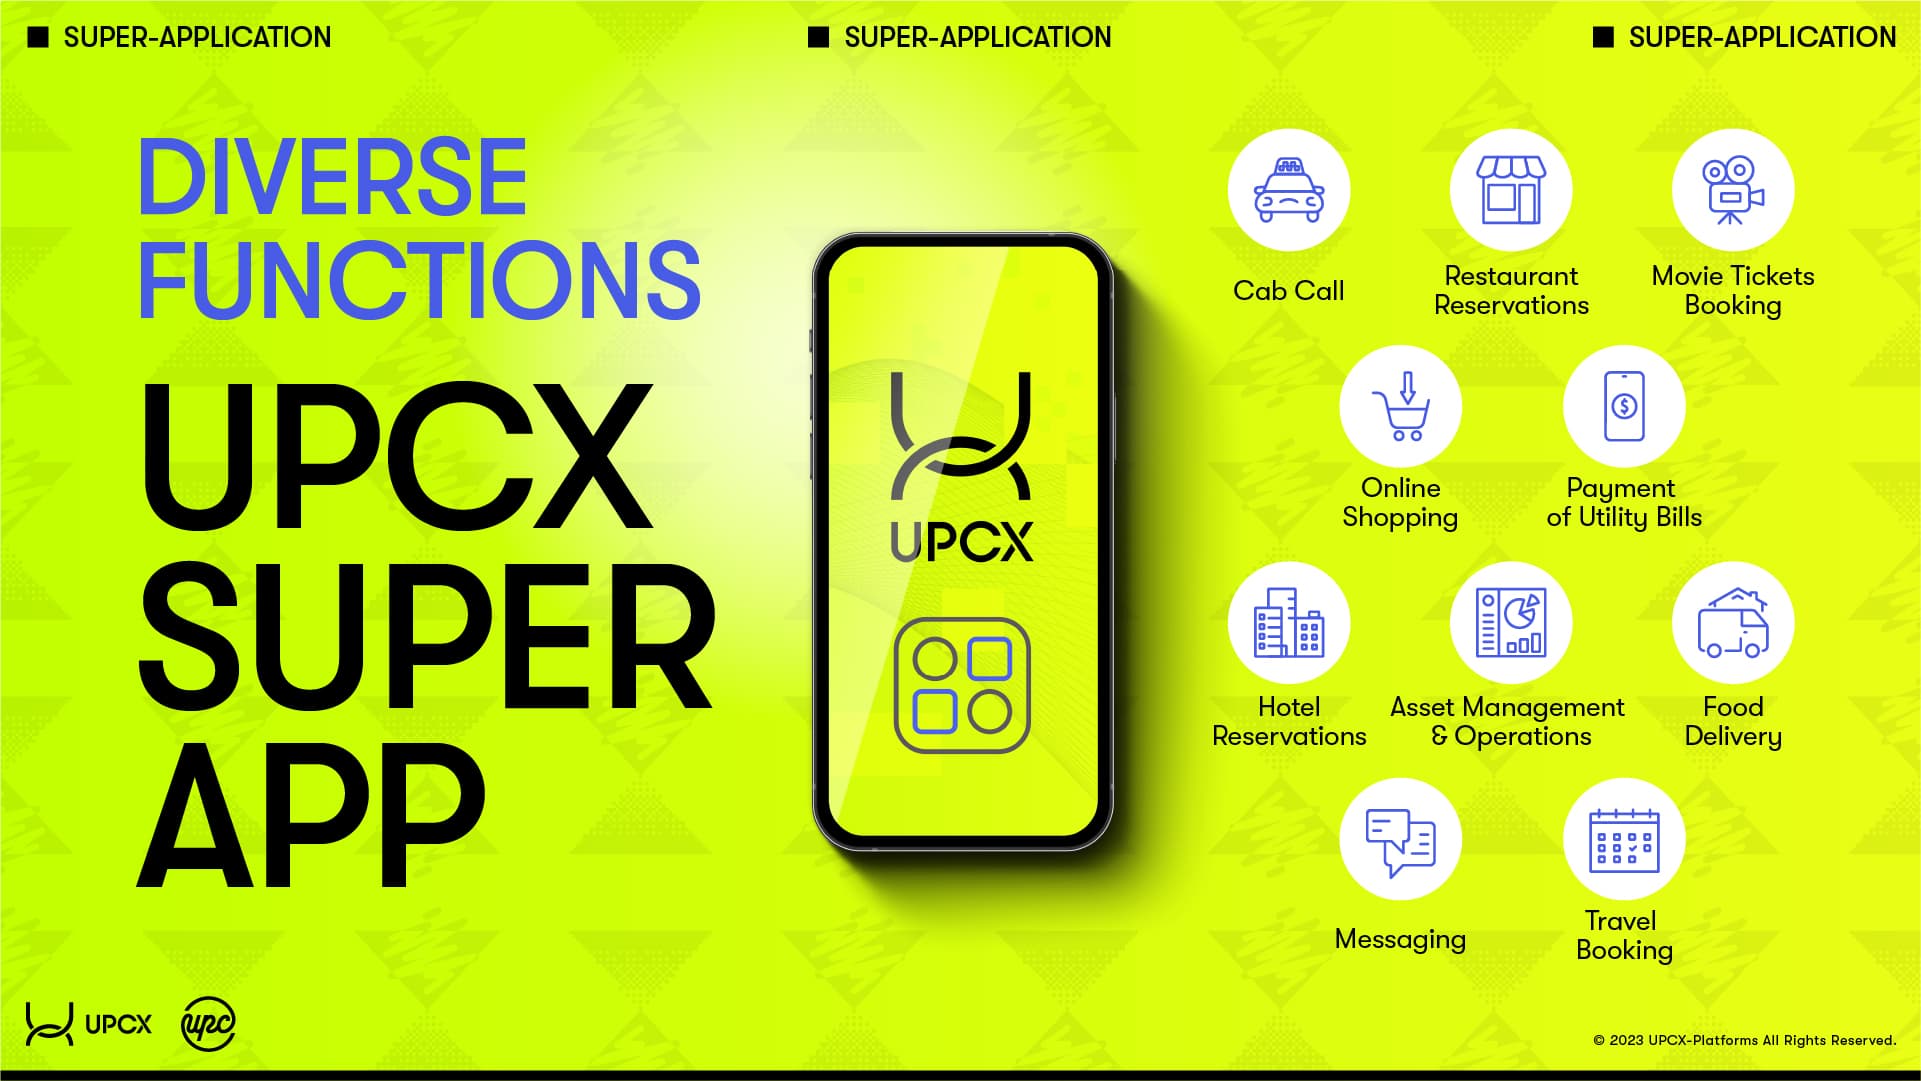 UPCX Super Application Overview